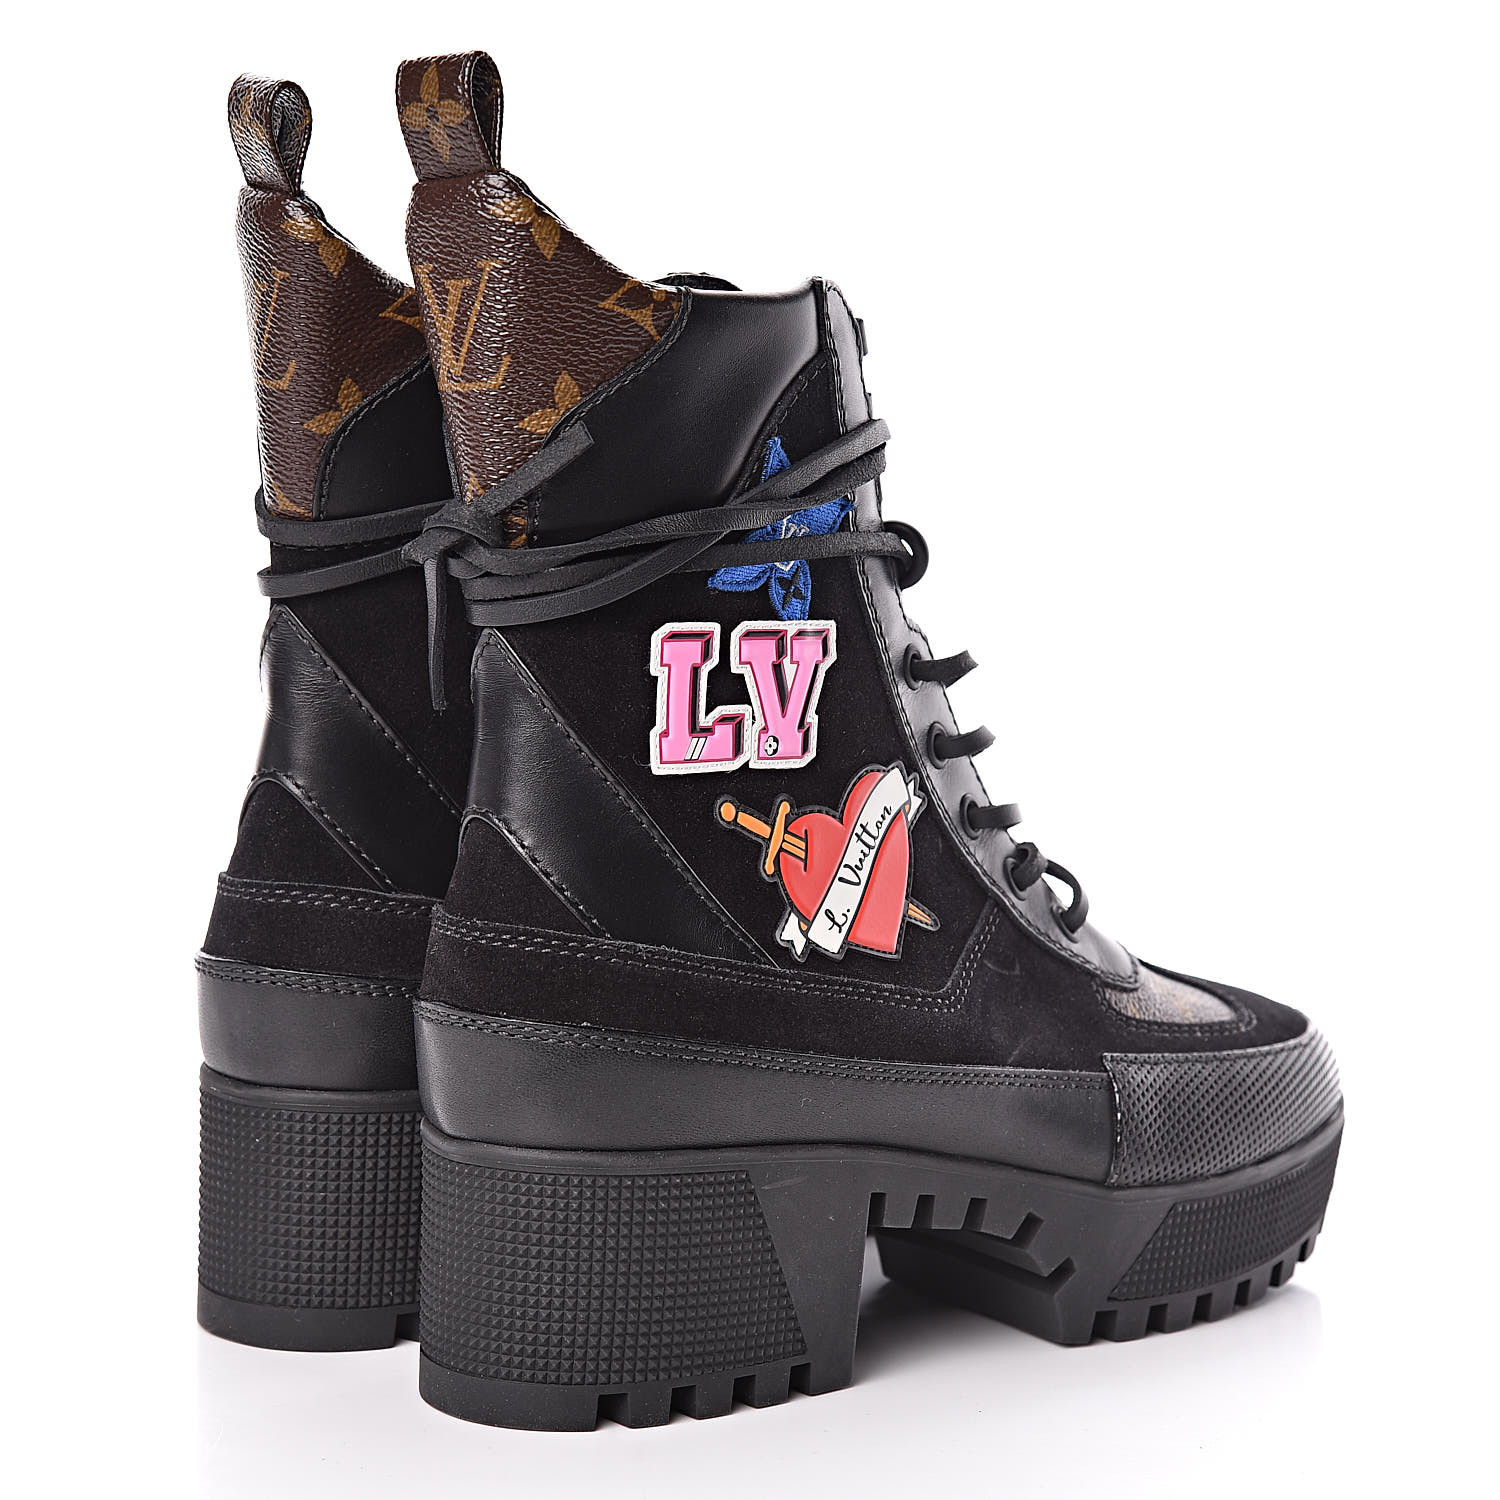 Fashion Bomb Daily - Named the Territory High Ranger boot by @louisvuitton  , these full-length boots with logo details and LV monogram tongue come  with a $2,050. Hot! Or Hmm….? * Want